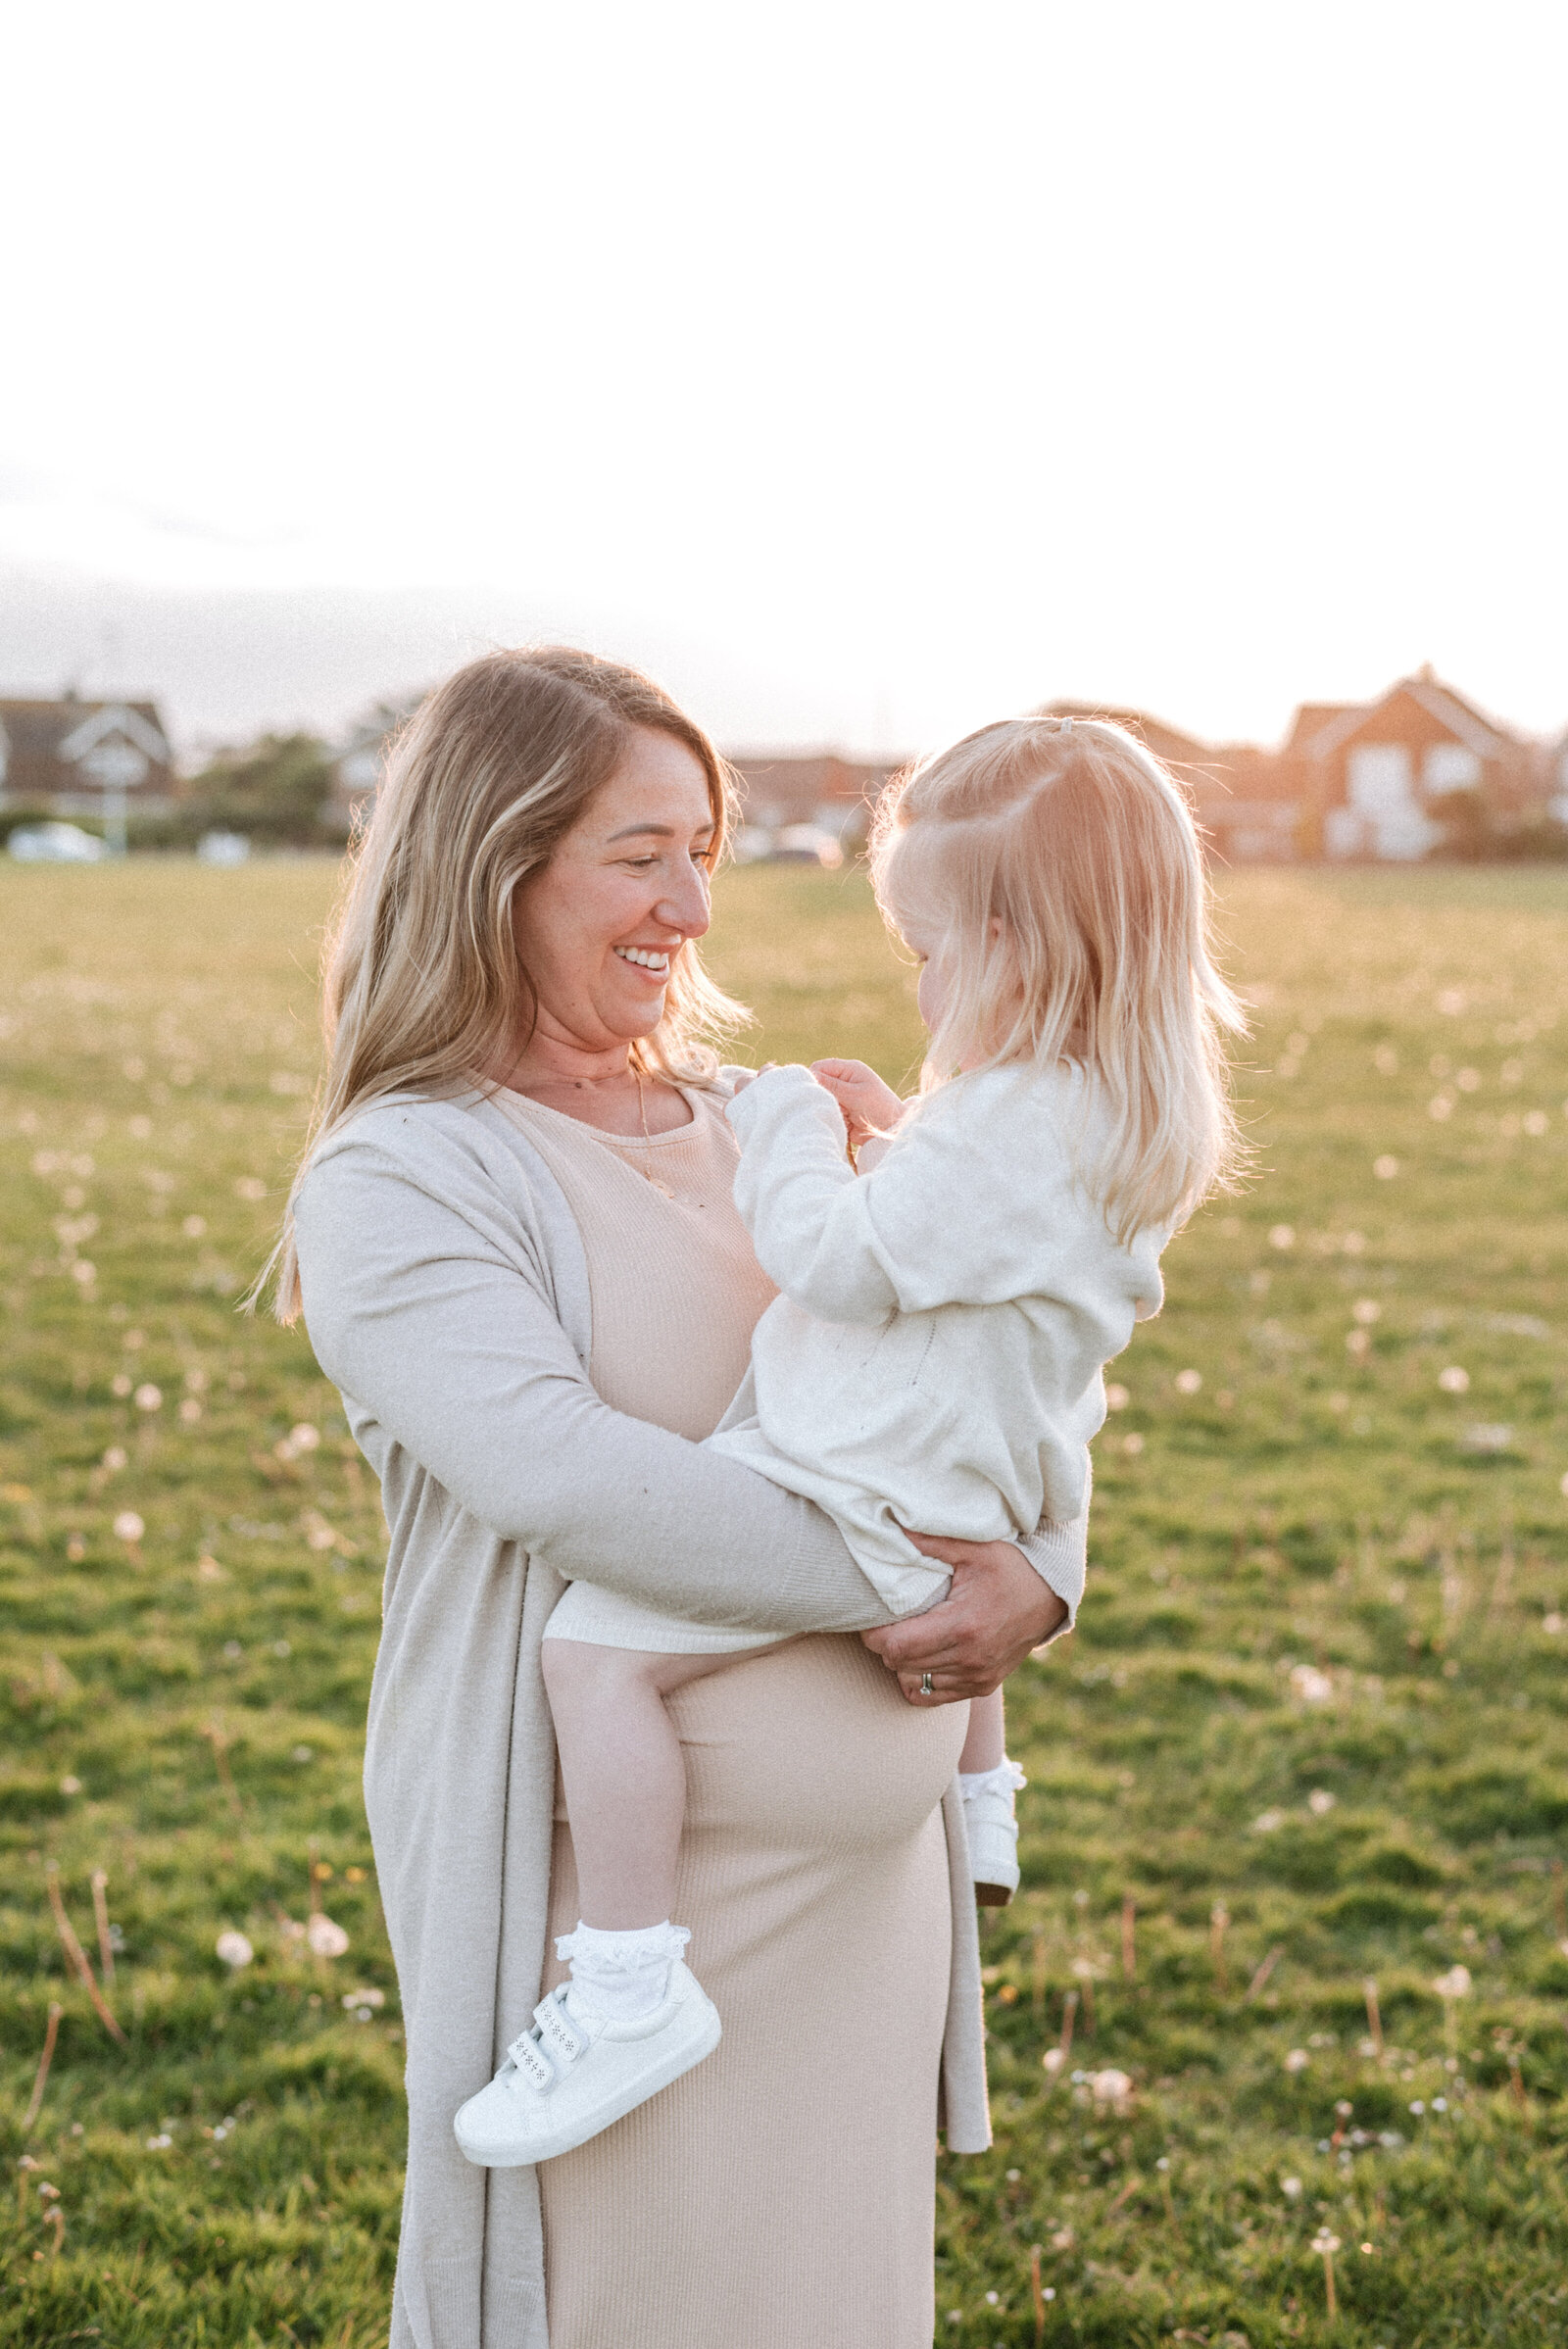 Pregnant mum holding her daughter smiling at a sunset family photoshoot in Billingshurst West Sussex